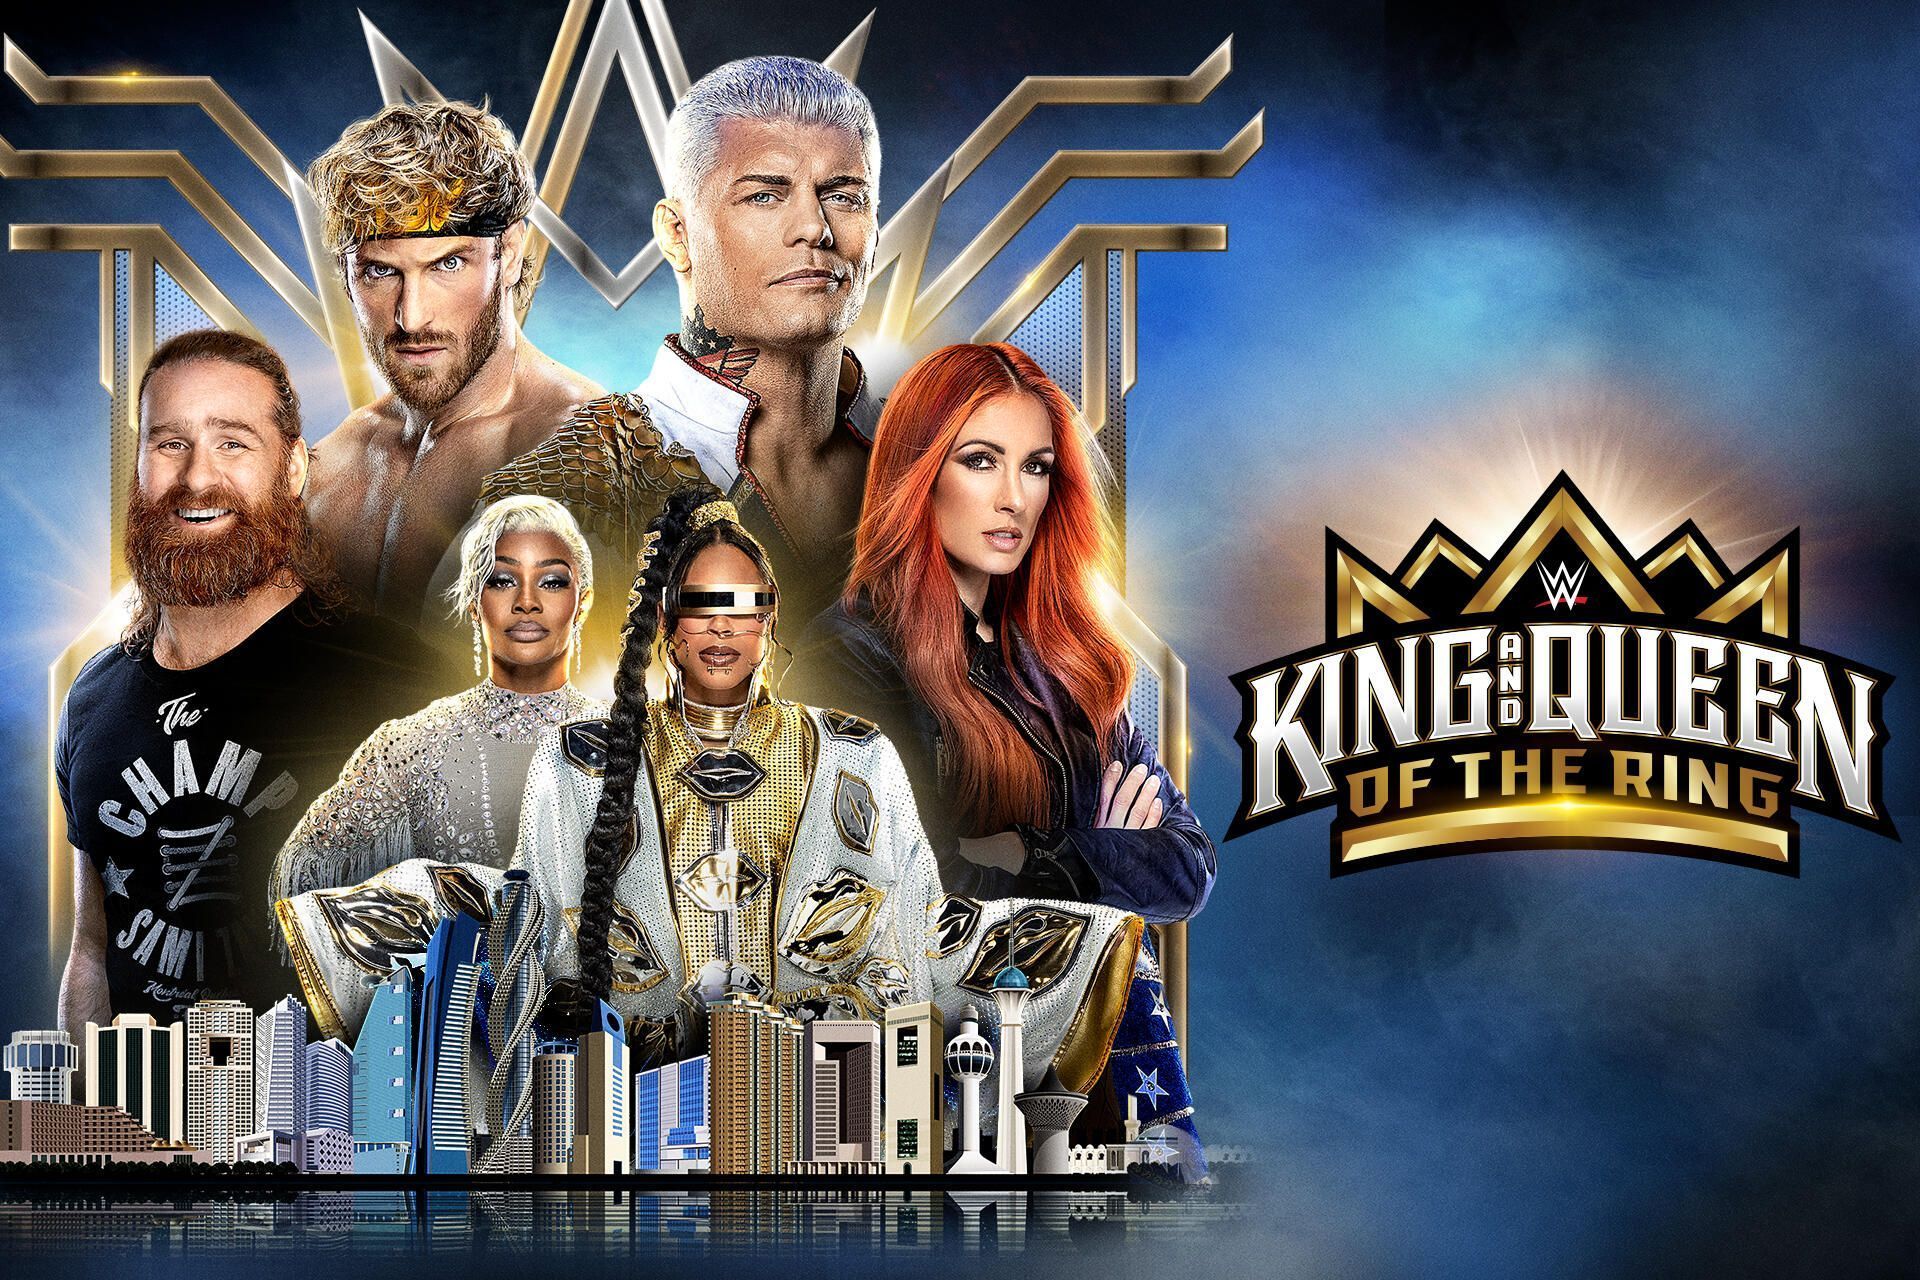 The official promotional poster for WWE King and Queen of the Ring